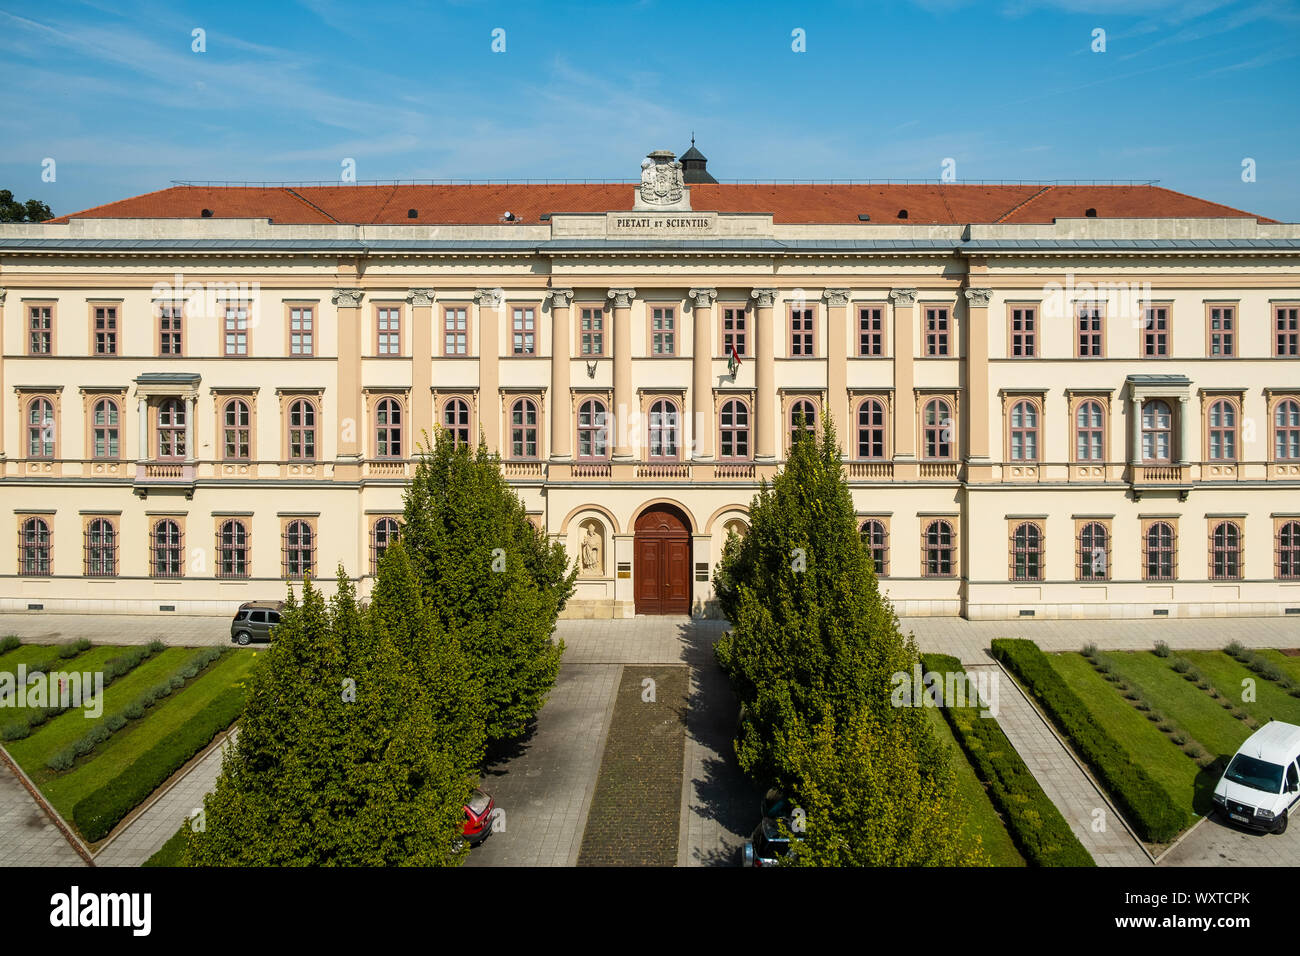 ESZTERGOM, HUNGARY - AUGUST 20, 2019: The old The old seminary in Esztergom after the renovations in 2006in Esztergom after the renovations in 2006 Stock Photo